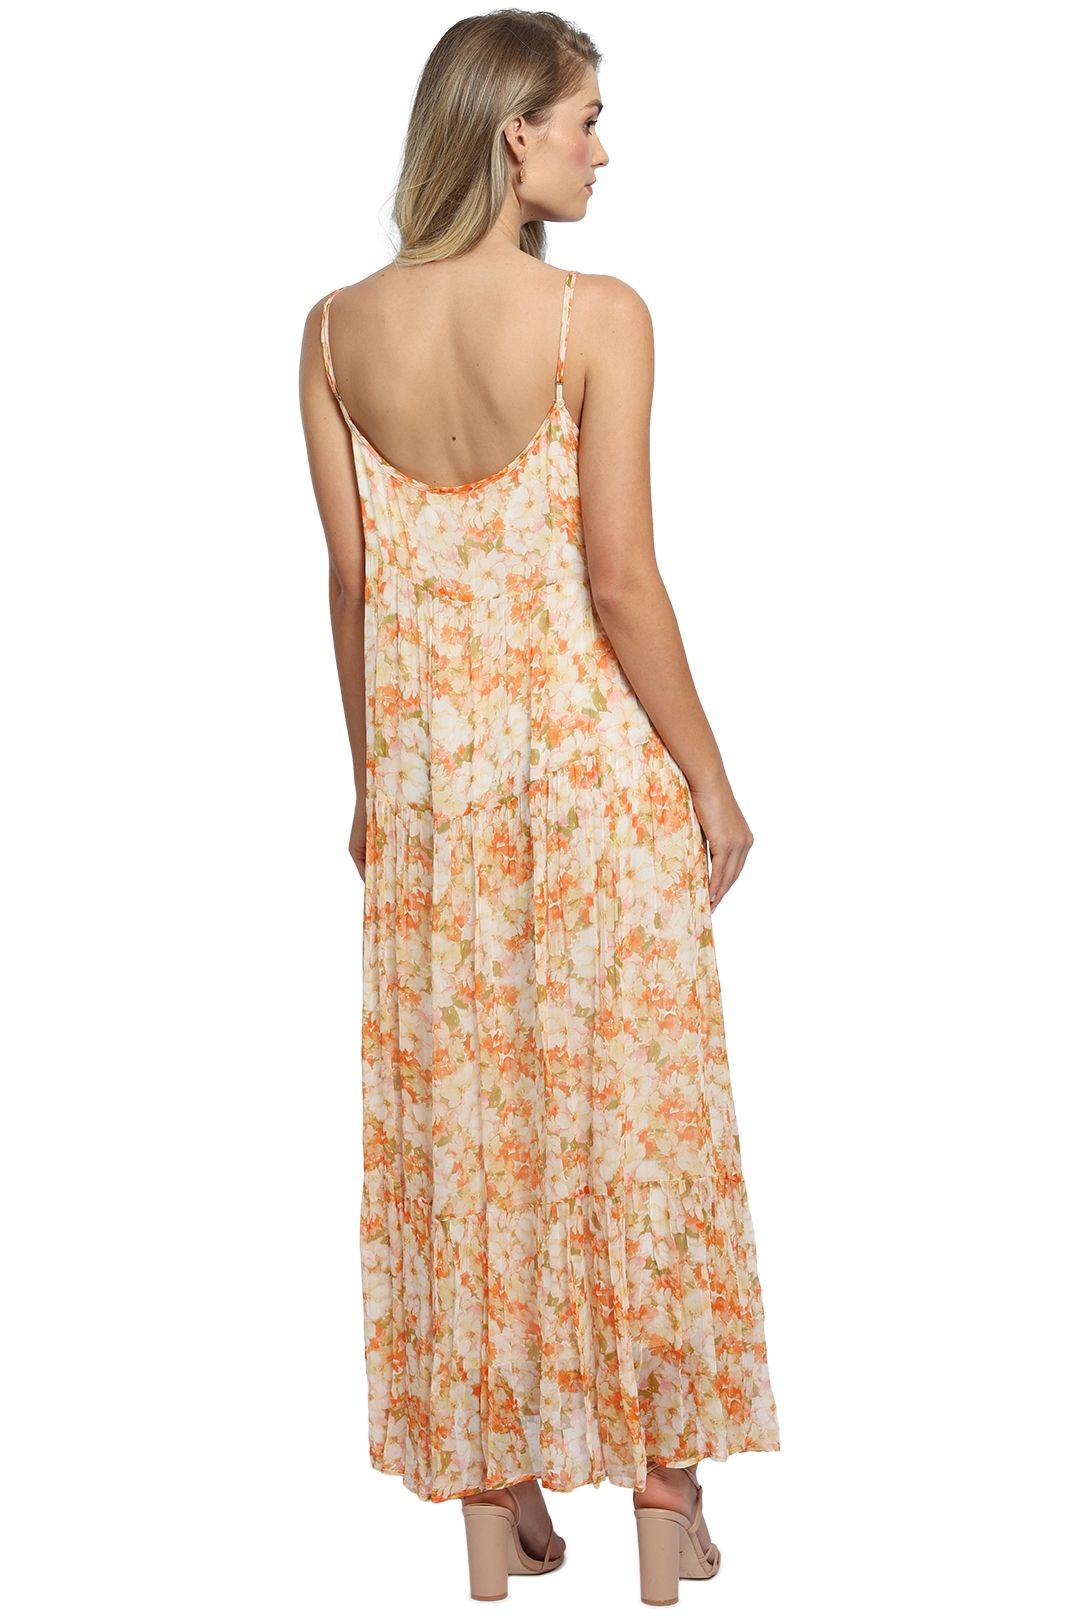 Ministry of Style Spring Meadows Maxi Dress slip